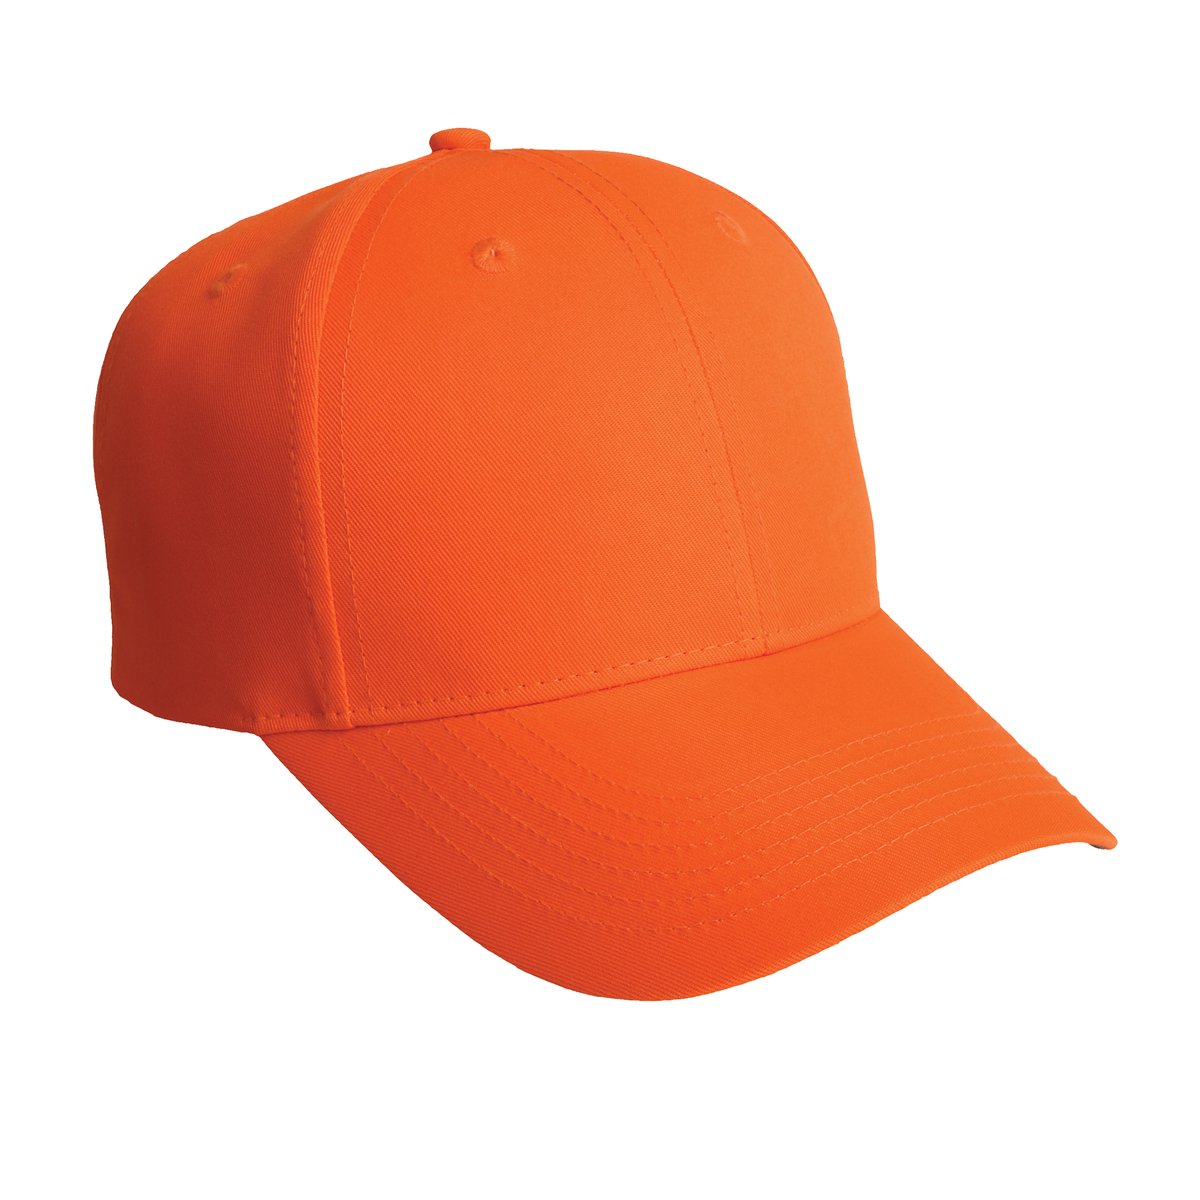 Port Authority Solid Enhanced Visibility Cap-Port Authority